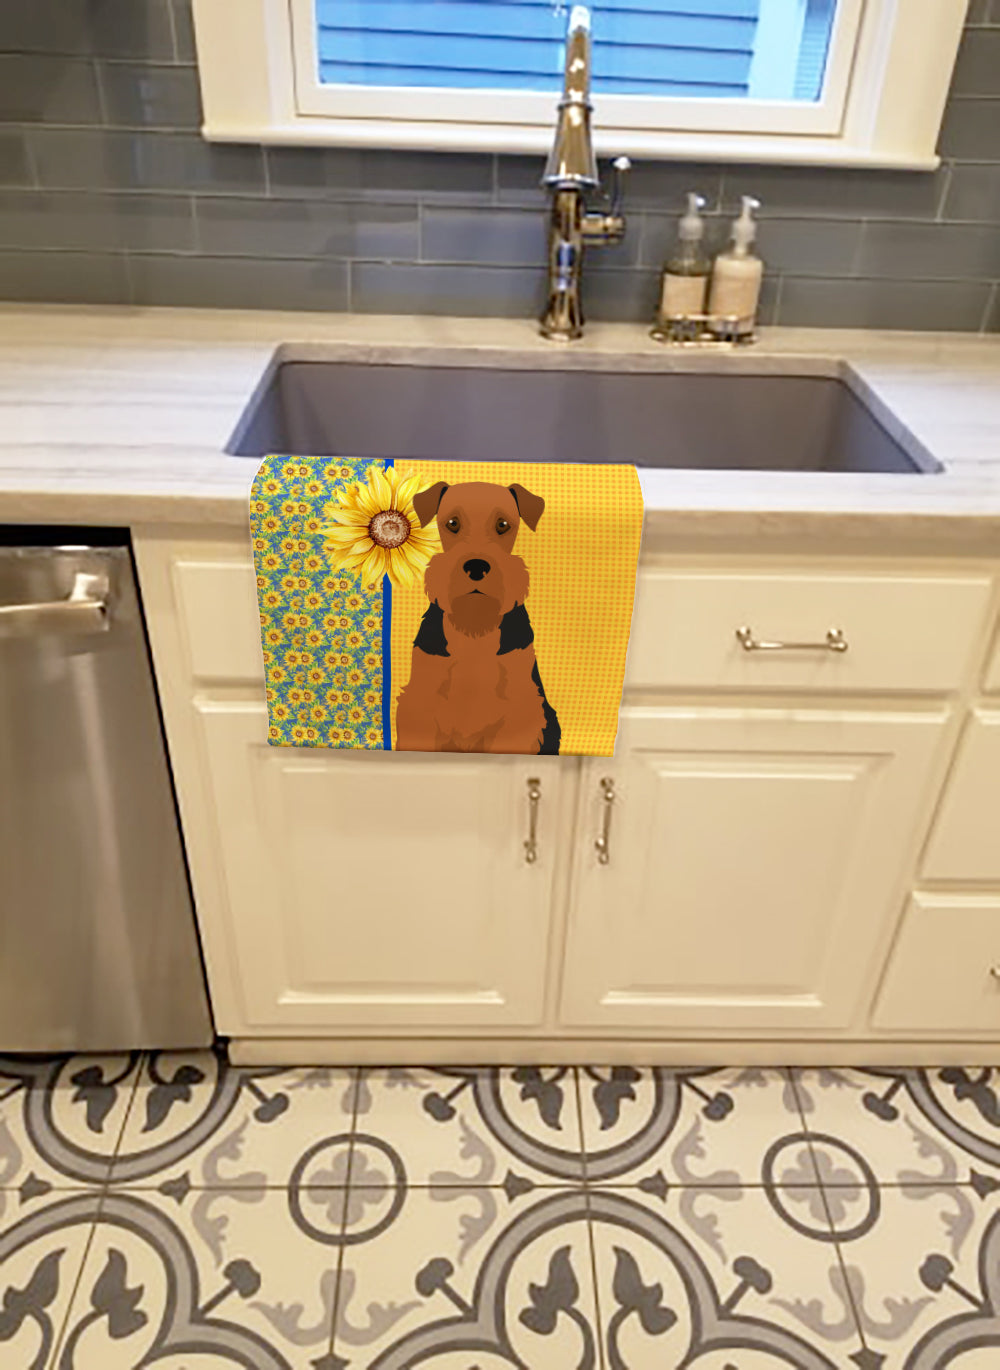 Buy this Summer Sunflowers Black and Tan Airedale Terrier Kitchen Towel